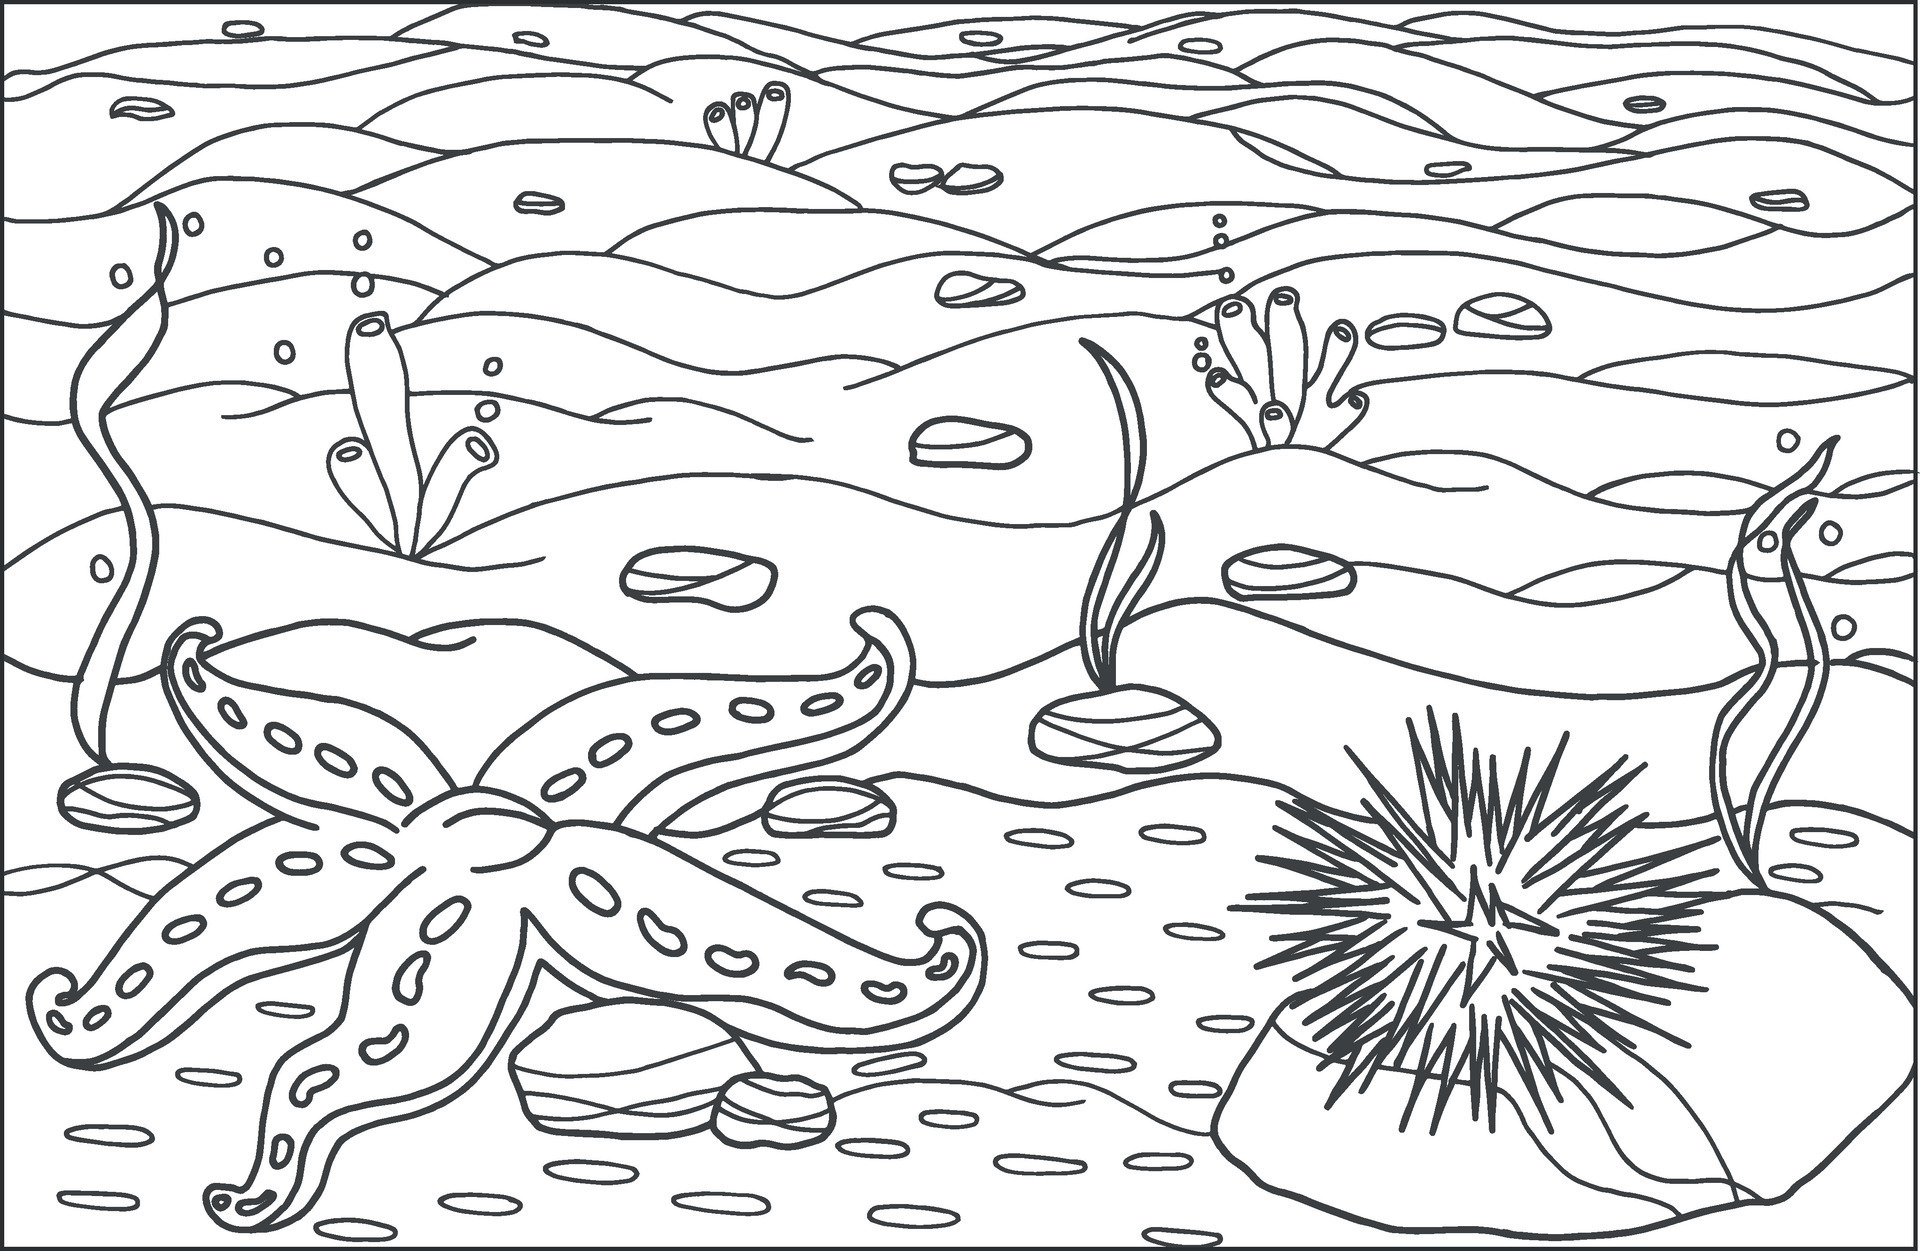 A starfish with sea urchin. Coloring page, hand drawn for